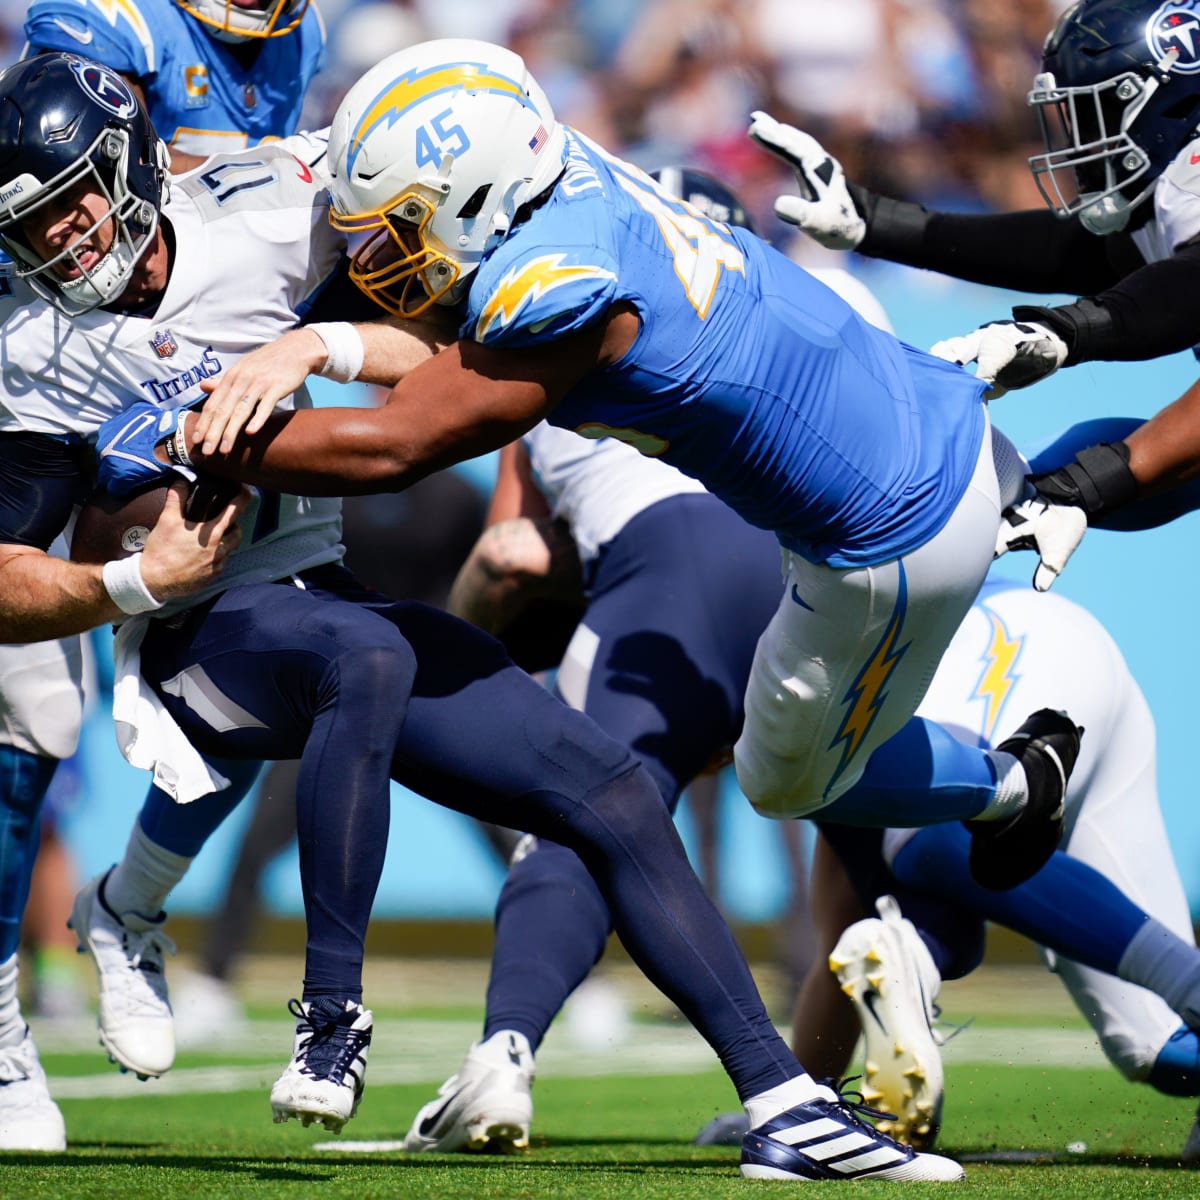 WATCH: Chargers' Joey Bosa bull rushes way to sack against Carolina